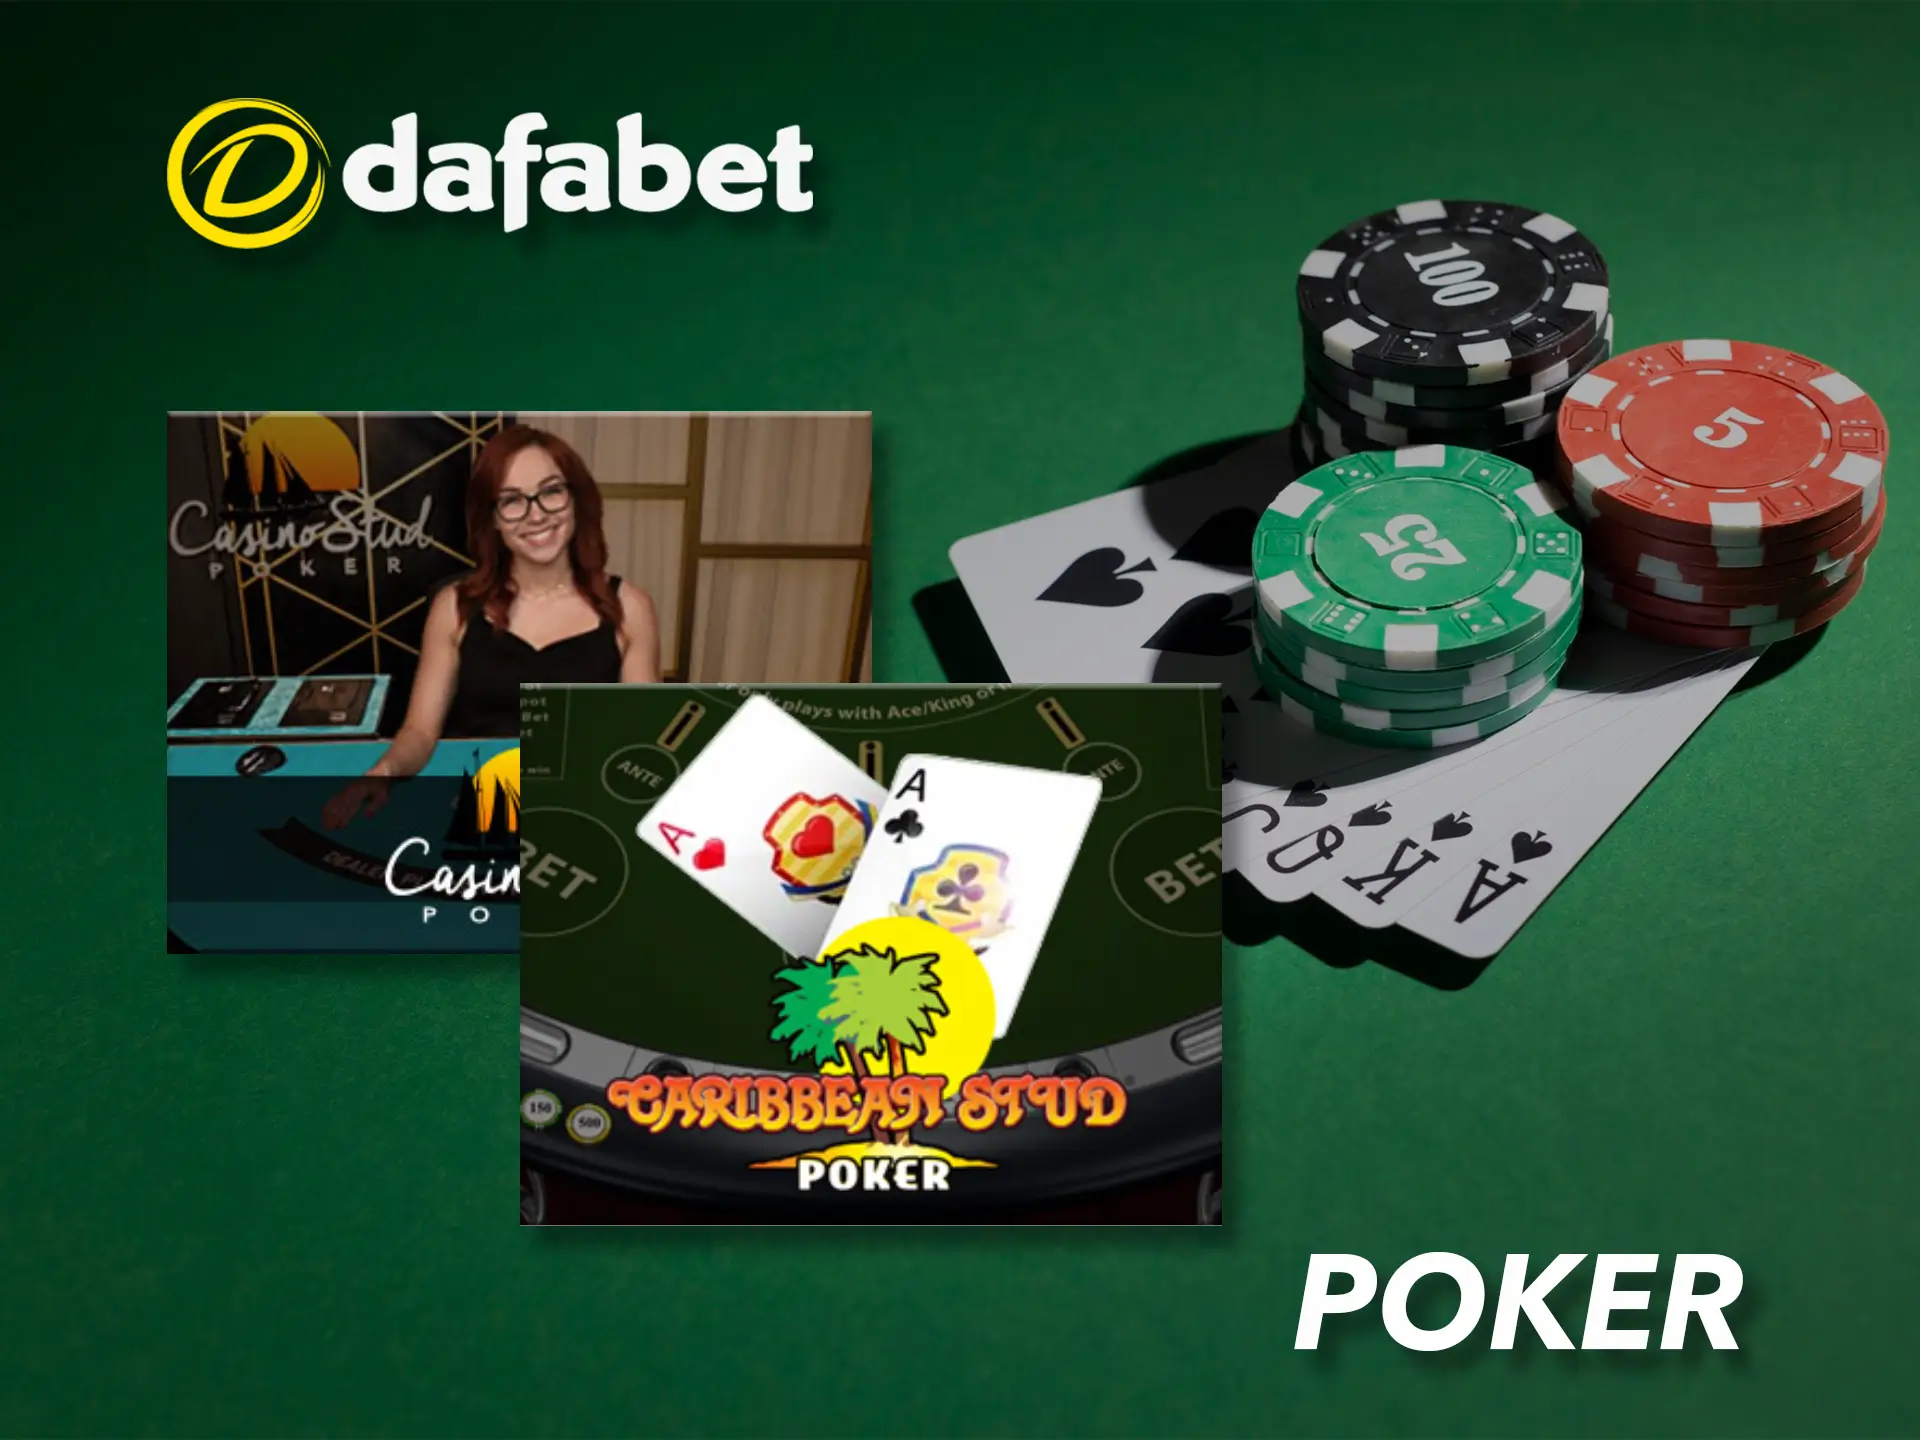 Use defensive or aggressive tactics when playing poker from Dafabet.